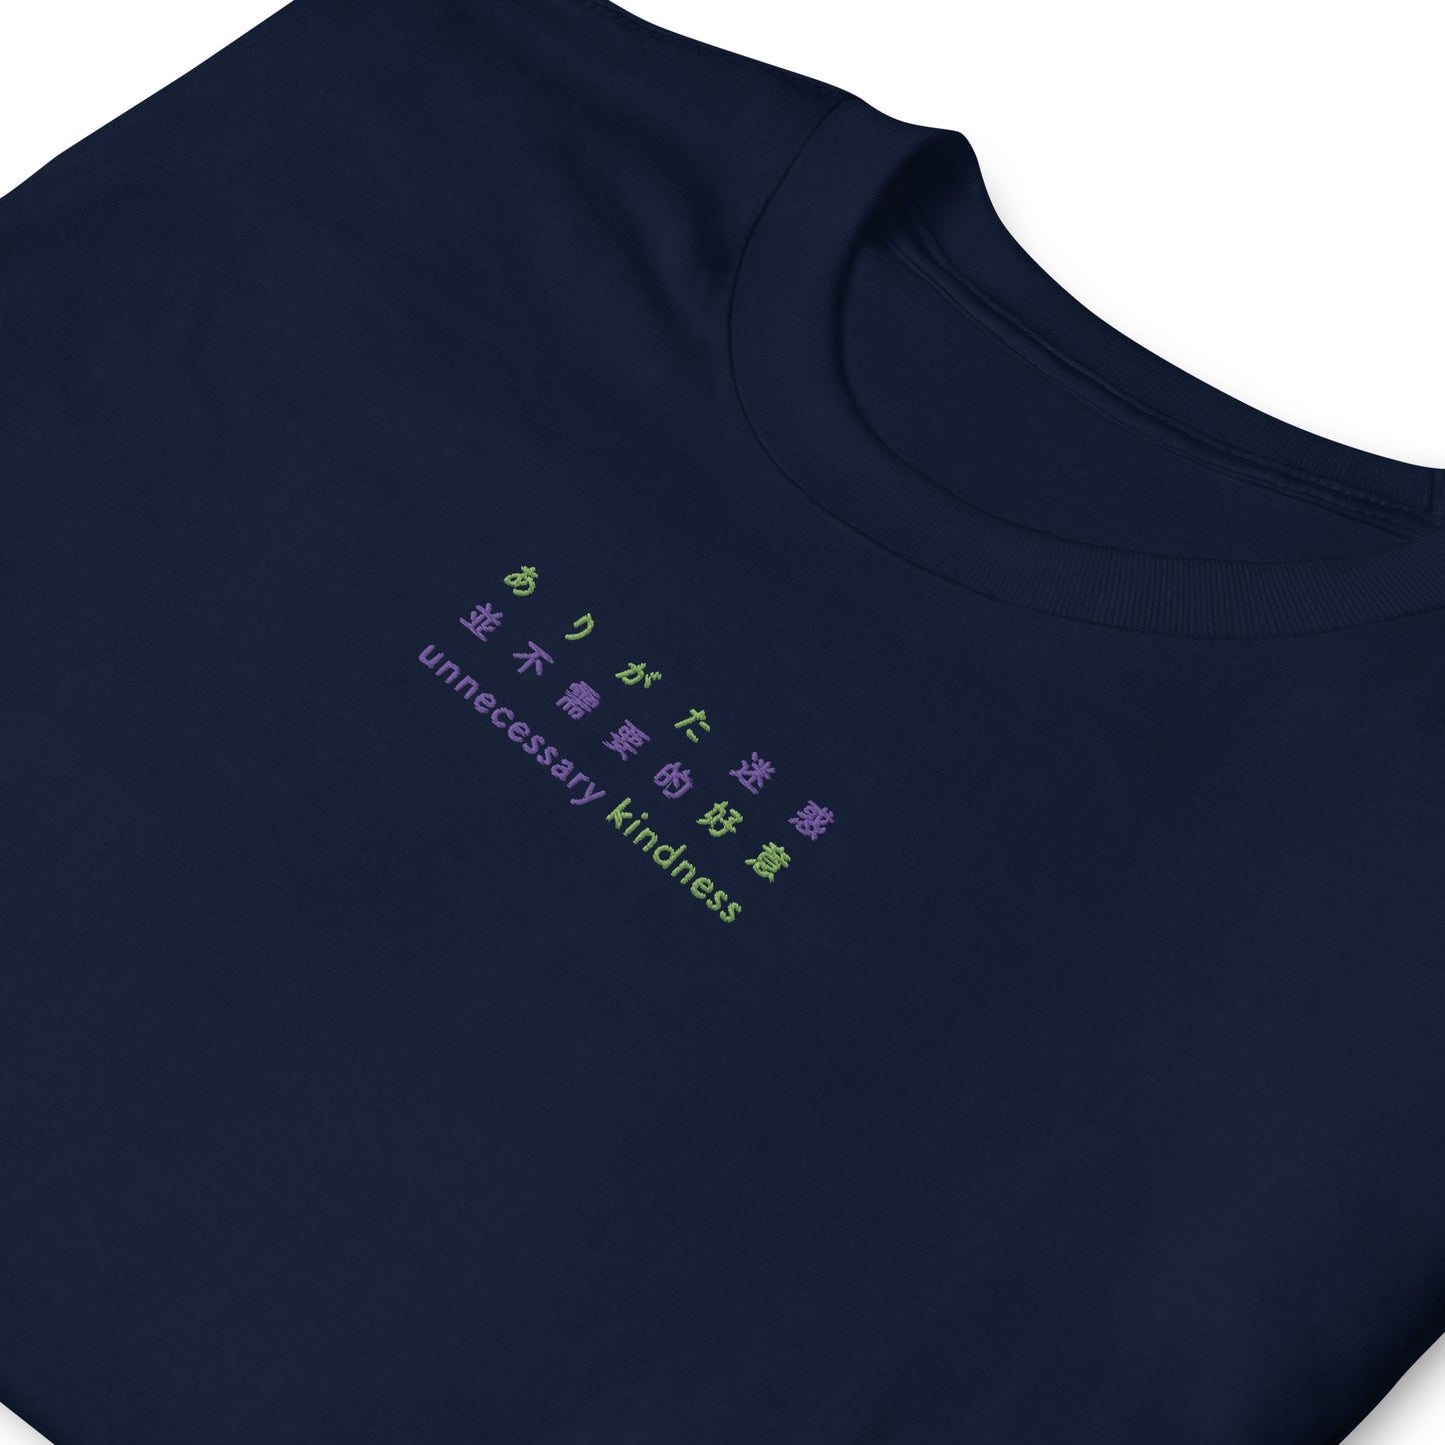 Navy High Quality Tee - Front Design with Green and Purple Embroidery "Unnecessary Kindness" in Japanese ,Chinese and English